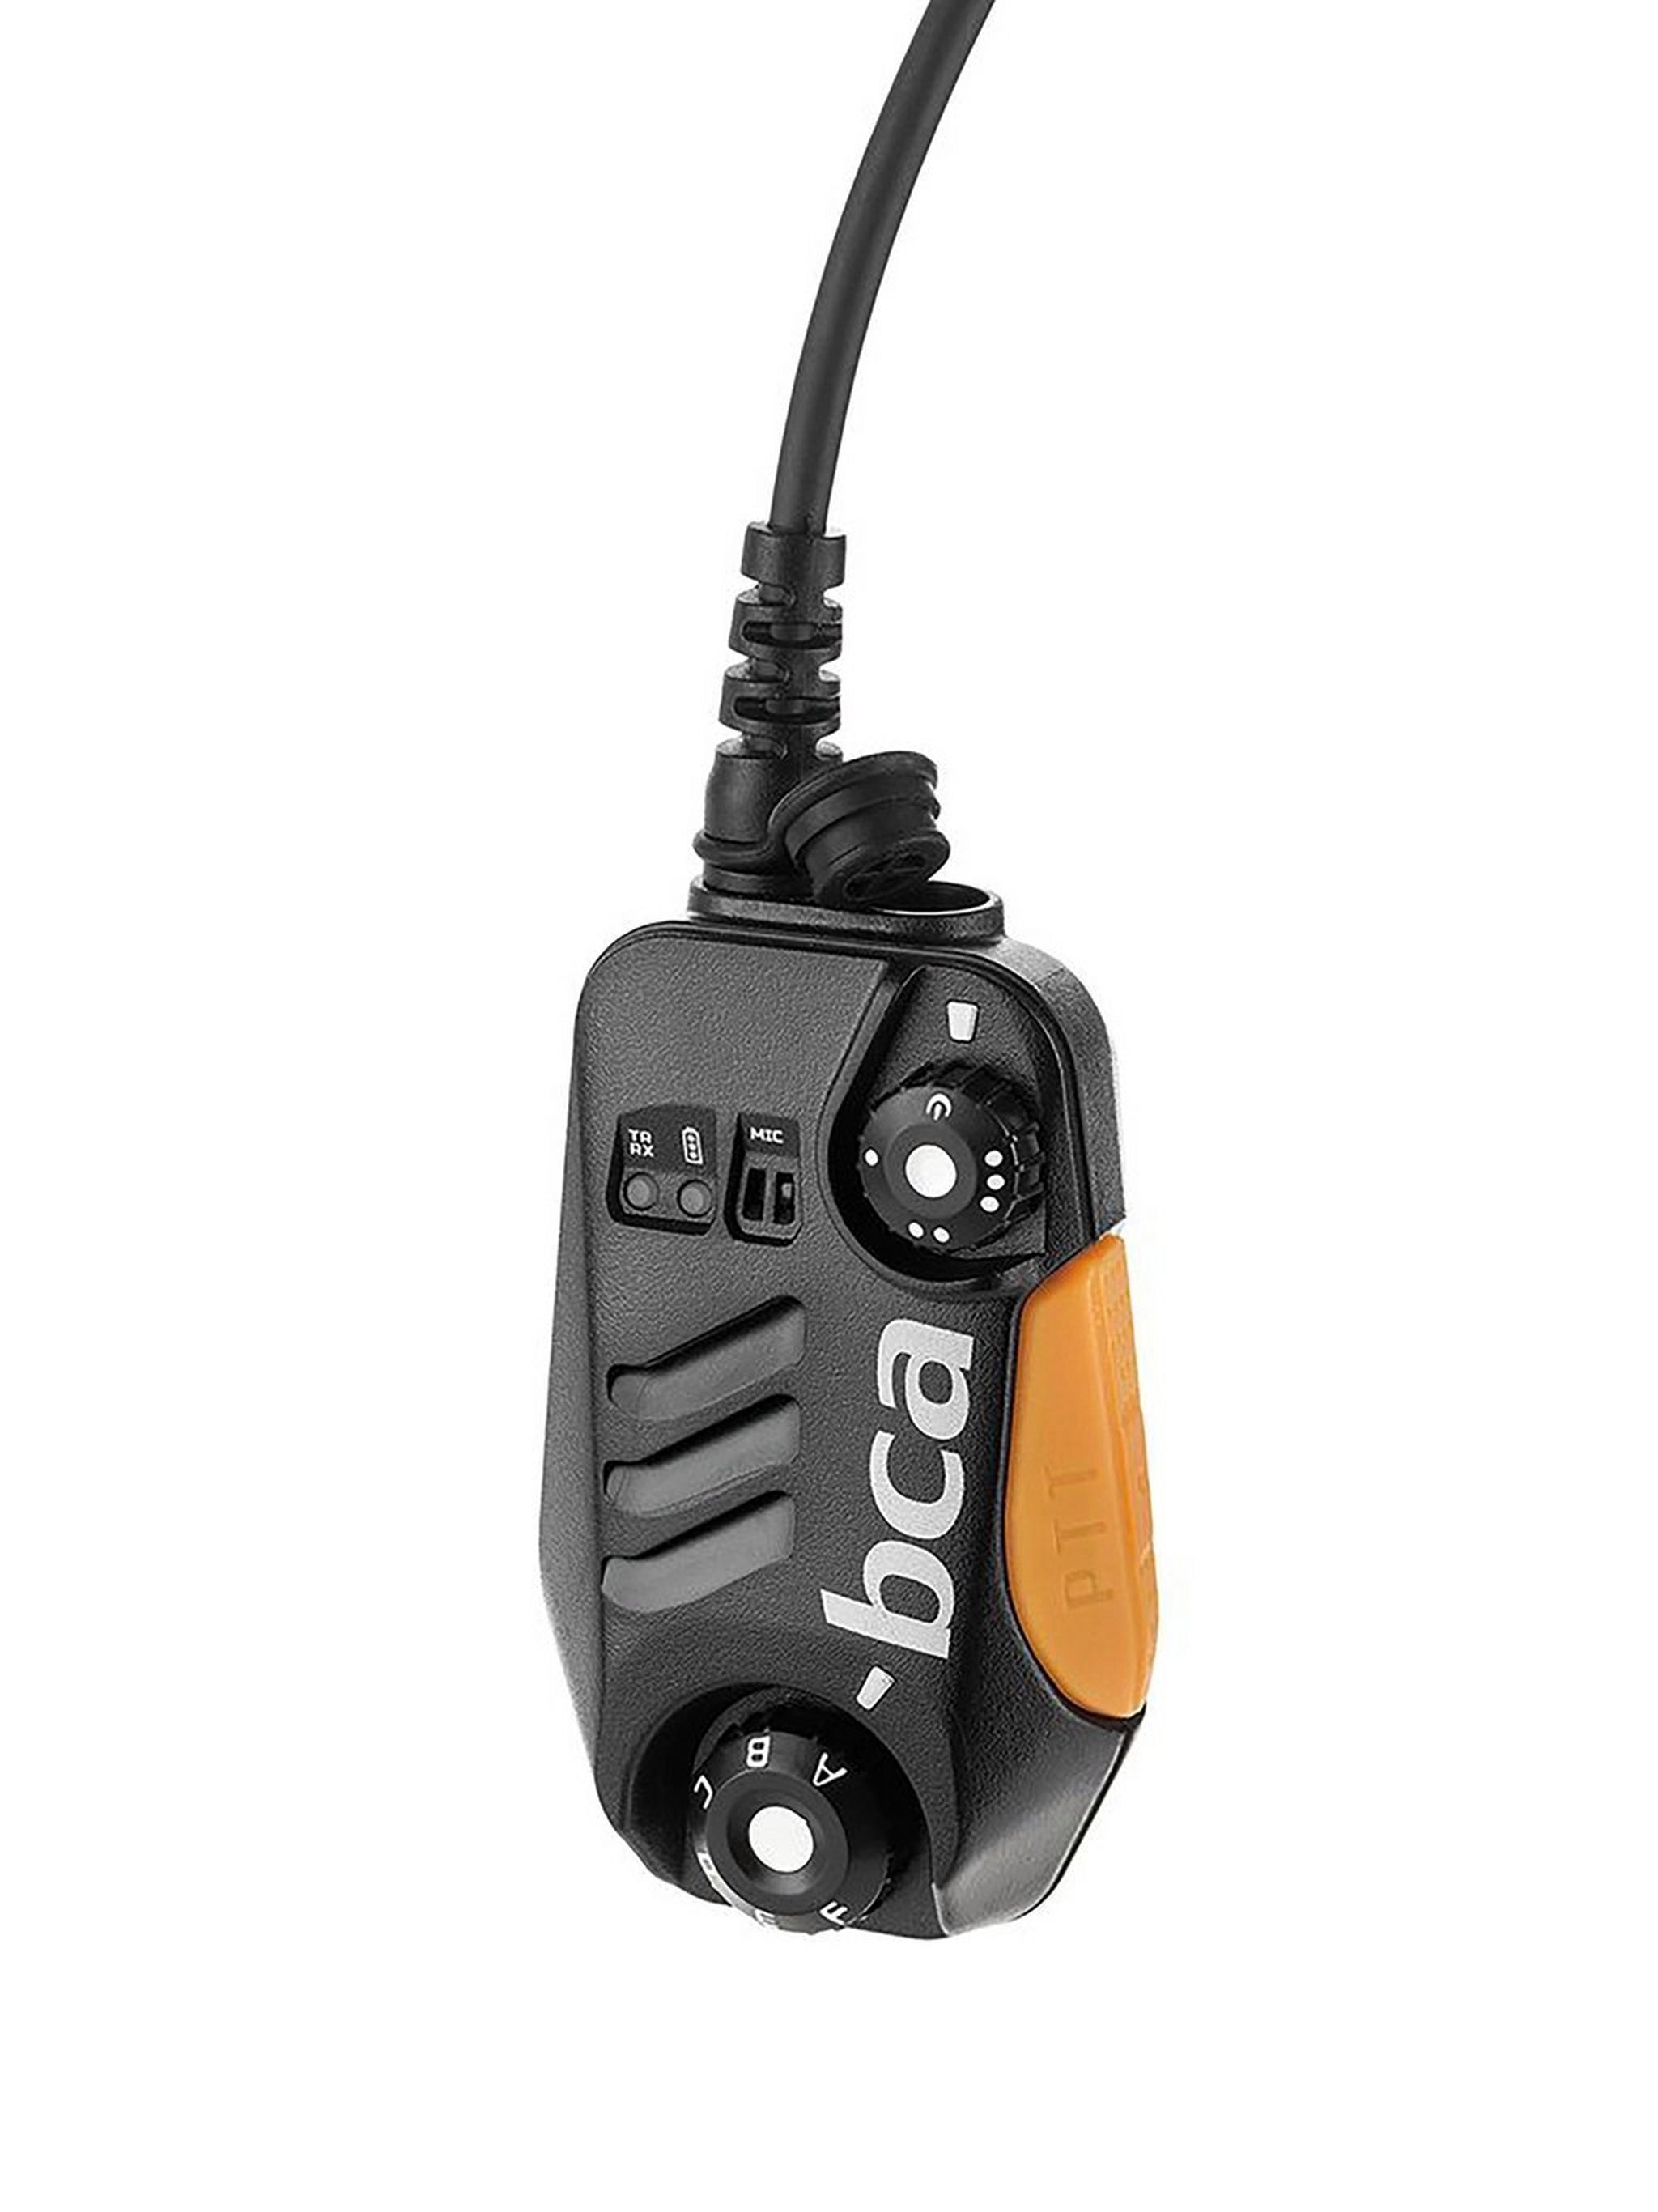 BCA Link 2.0 Two-Way Radio EU Version Available to Pre-Order – MOUNTAIN  SPORTS